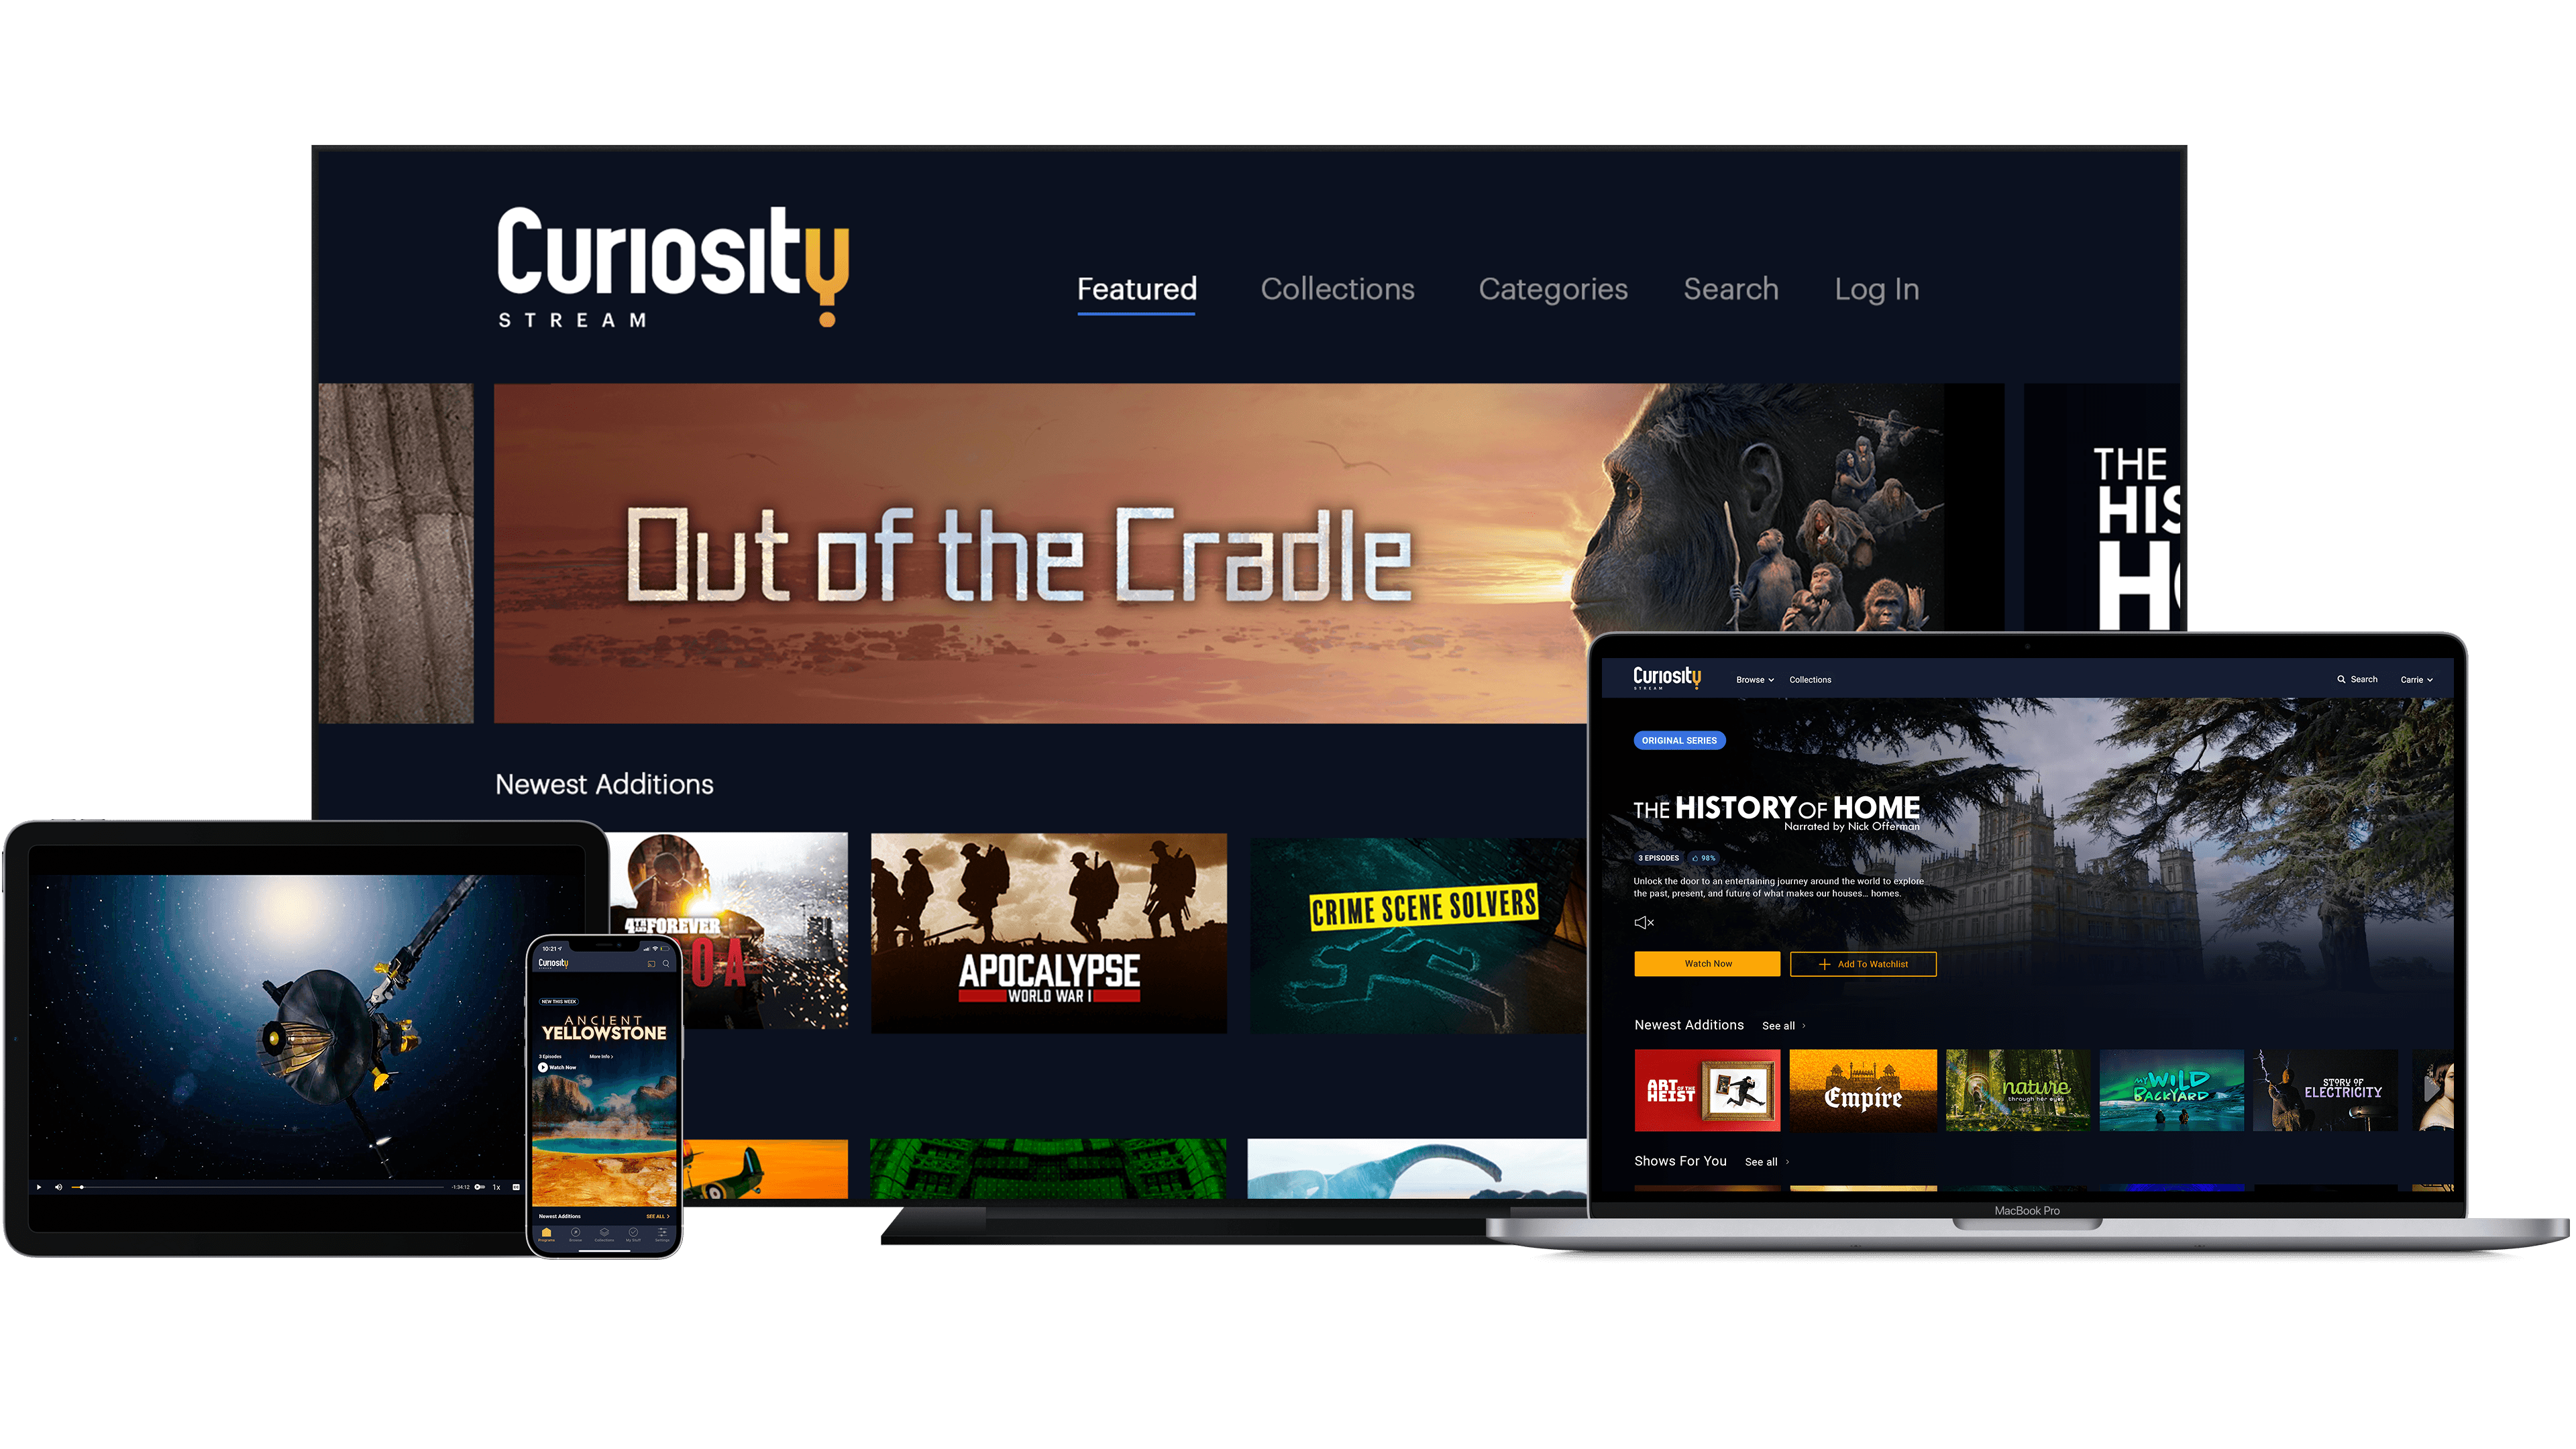 Deal Alert! Save 40% on Curiosity Stream During Cyber Monday